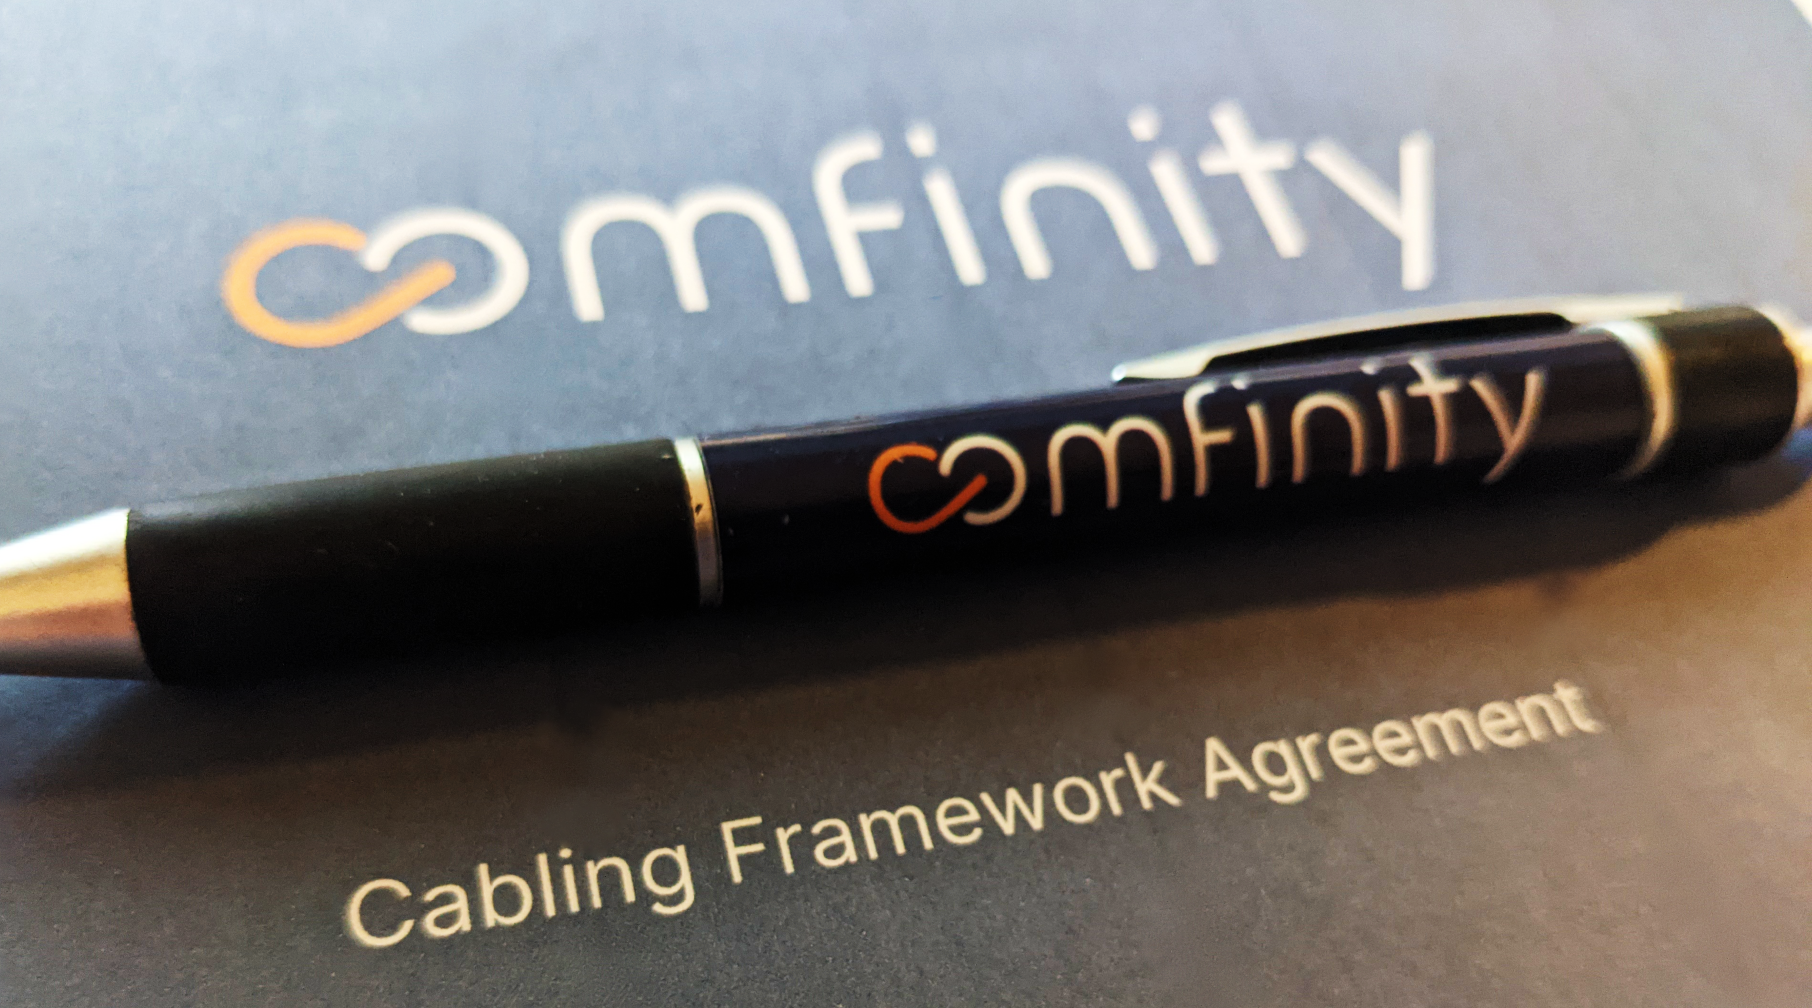 Benefits of a Cabling Framework Agreement